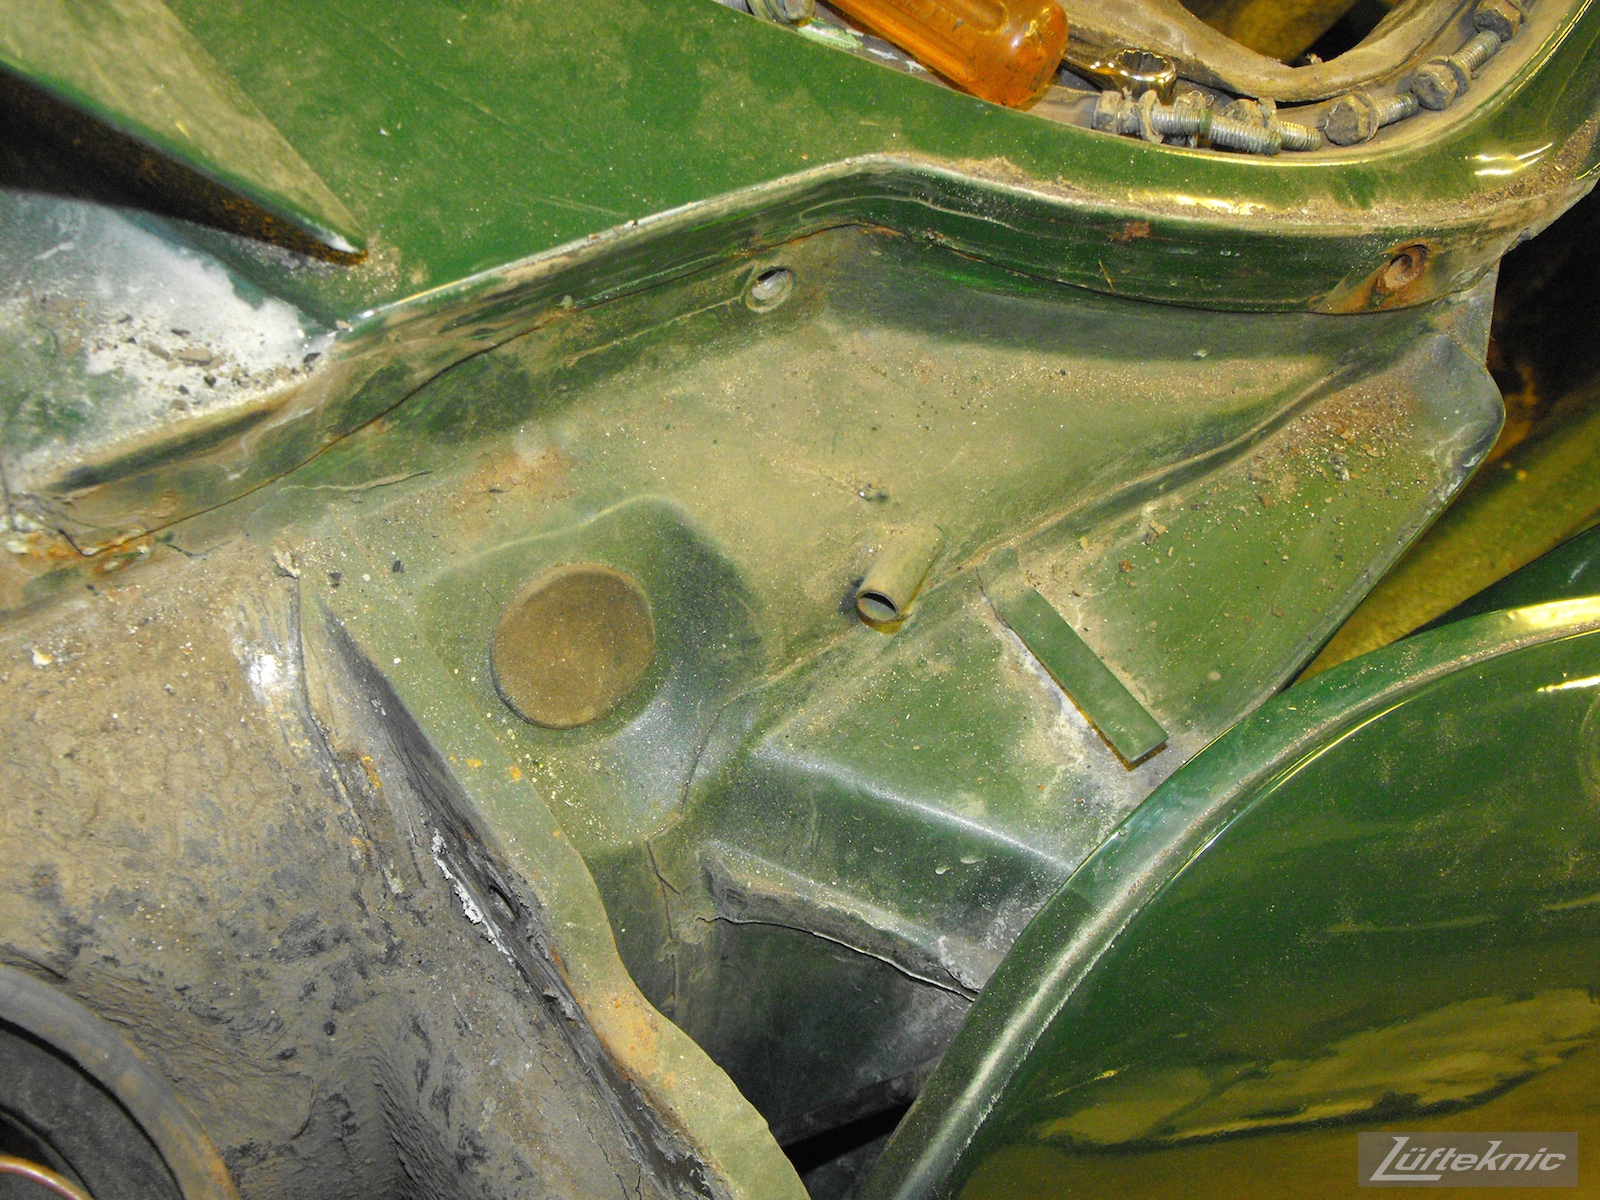 Front chassis detail where the driver's fender mounts on an Irish Green Porsche 912 undergoing restoration at Lufteknic.